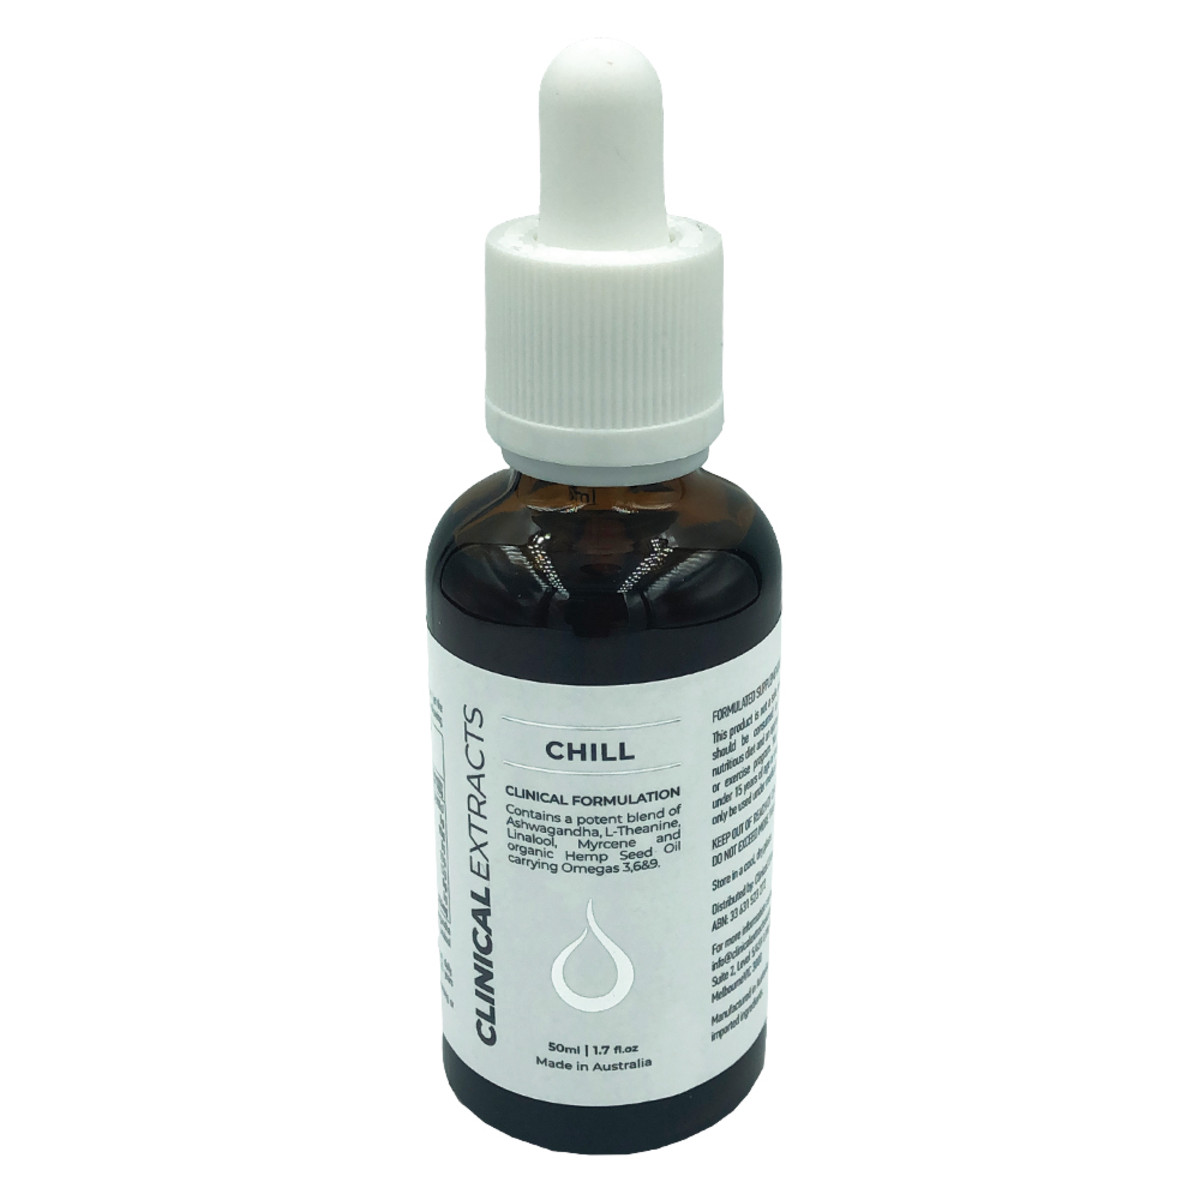 CLINICAL EXTRACTS – Clinical Formulation Chill 50ml